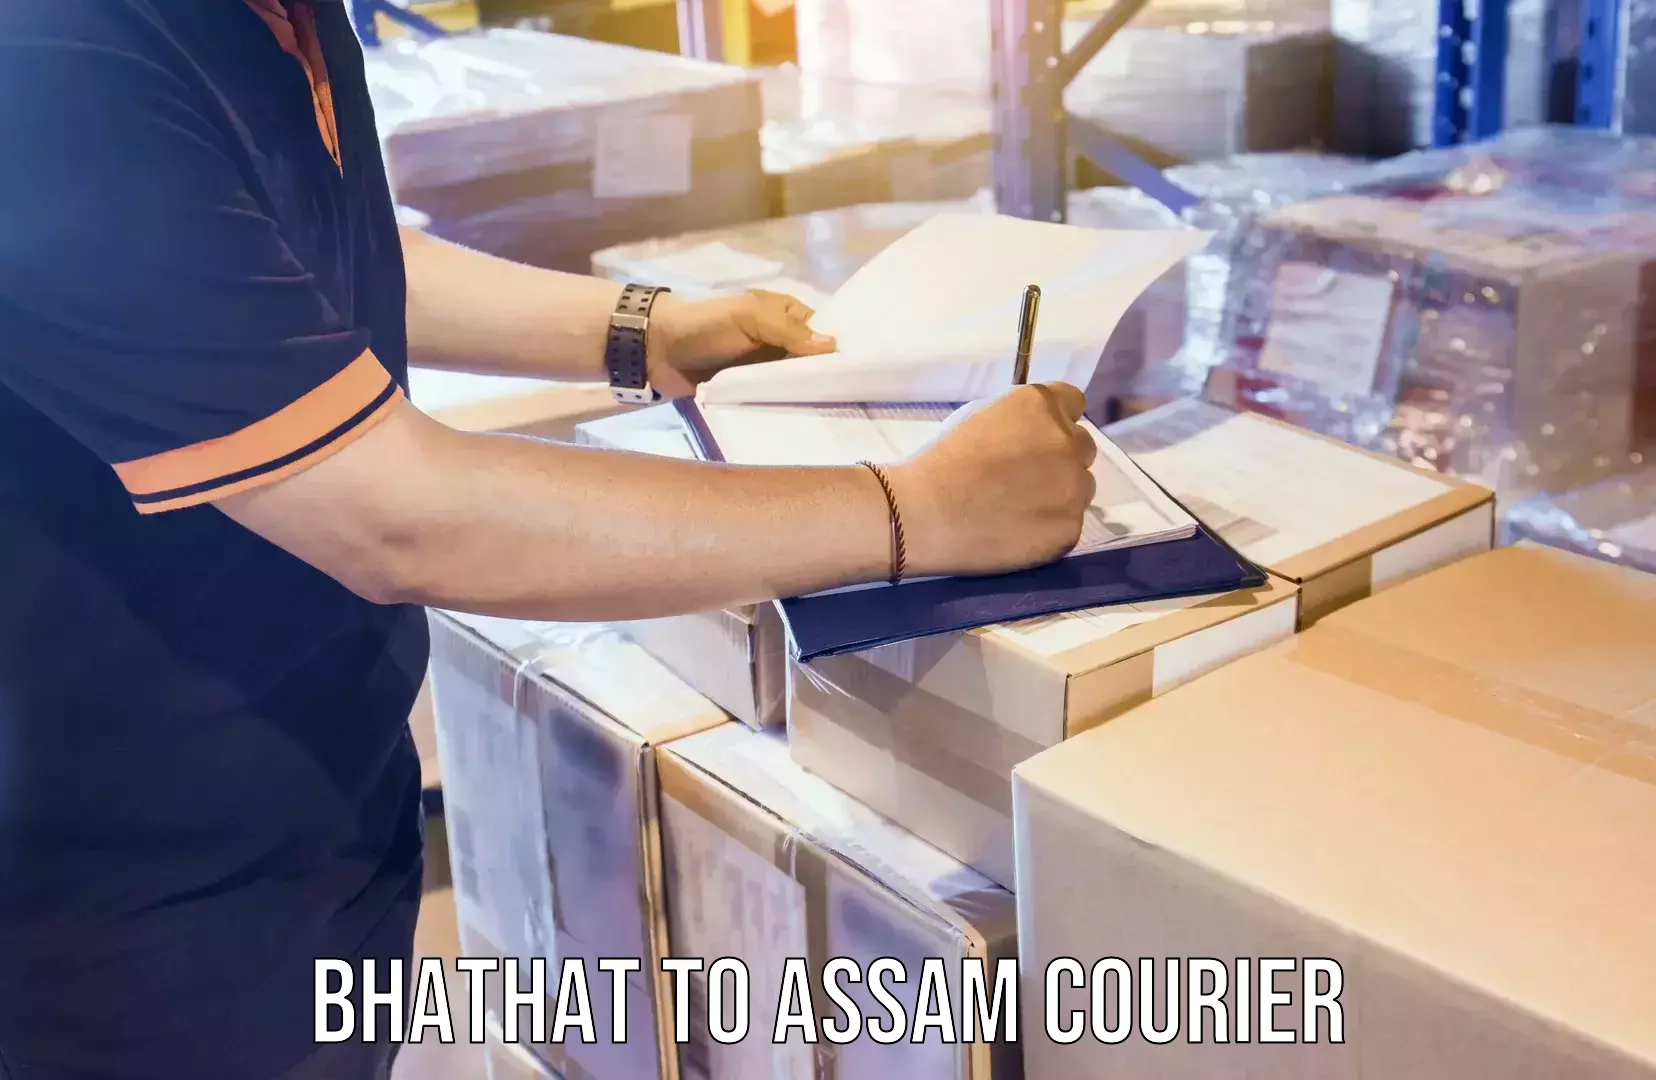 Custom courier packages Bhathat to Assam